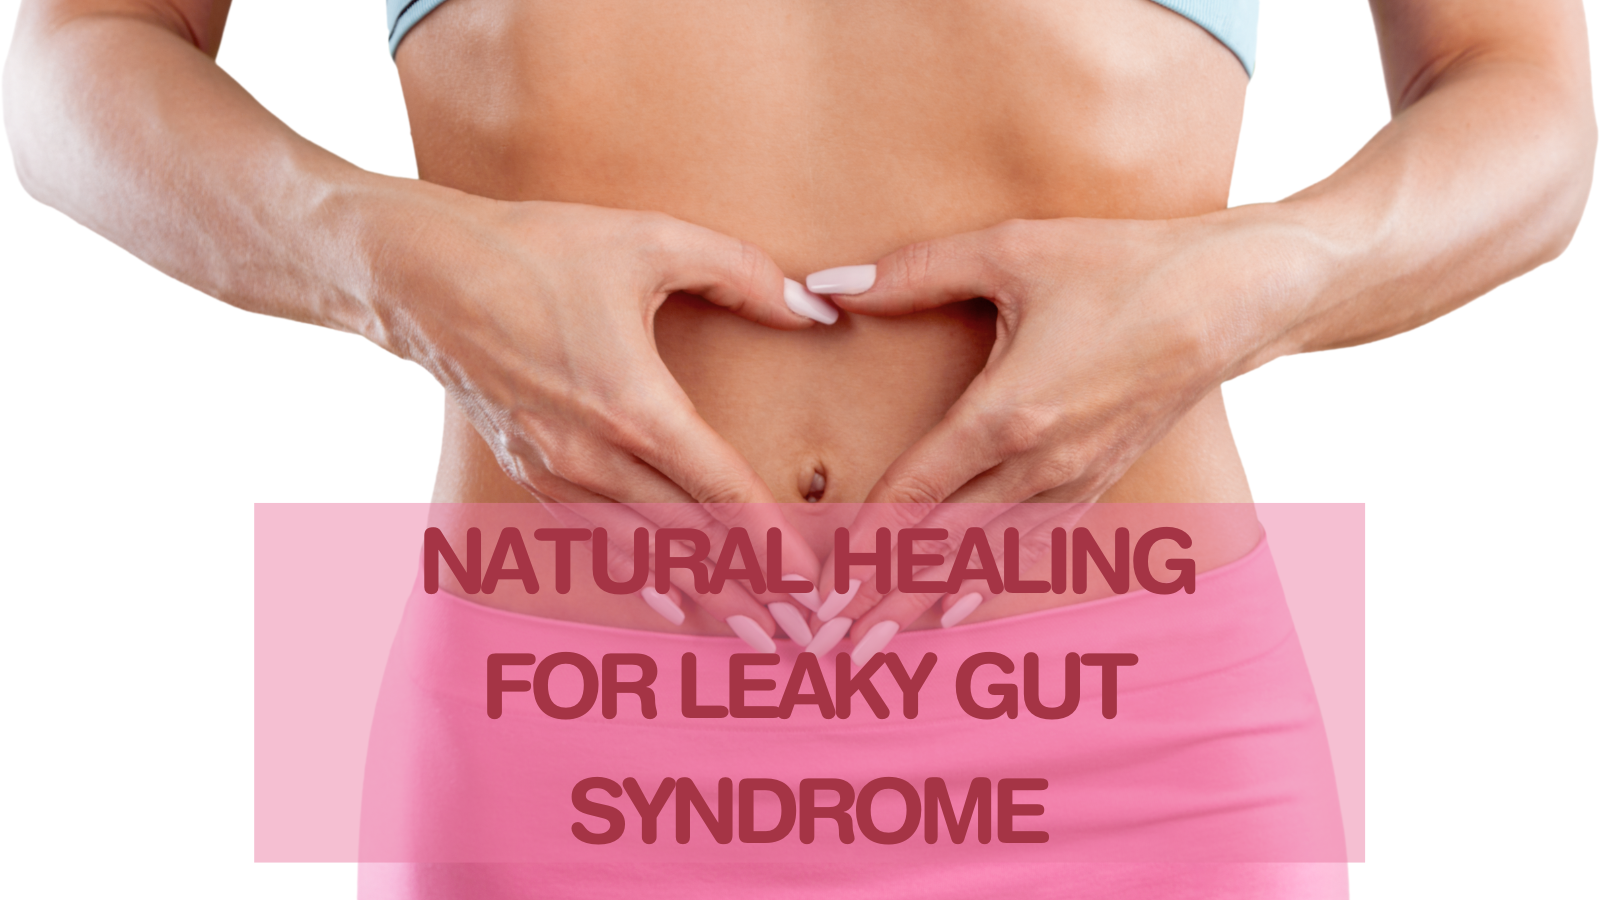 Natural Healing For A Leaky Gut Syndrome